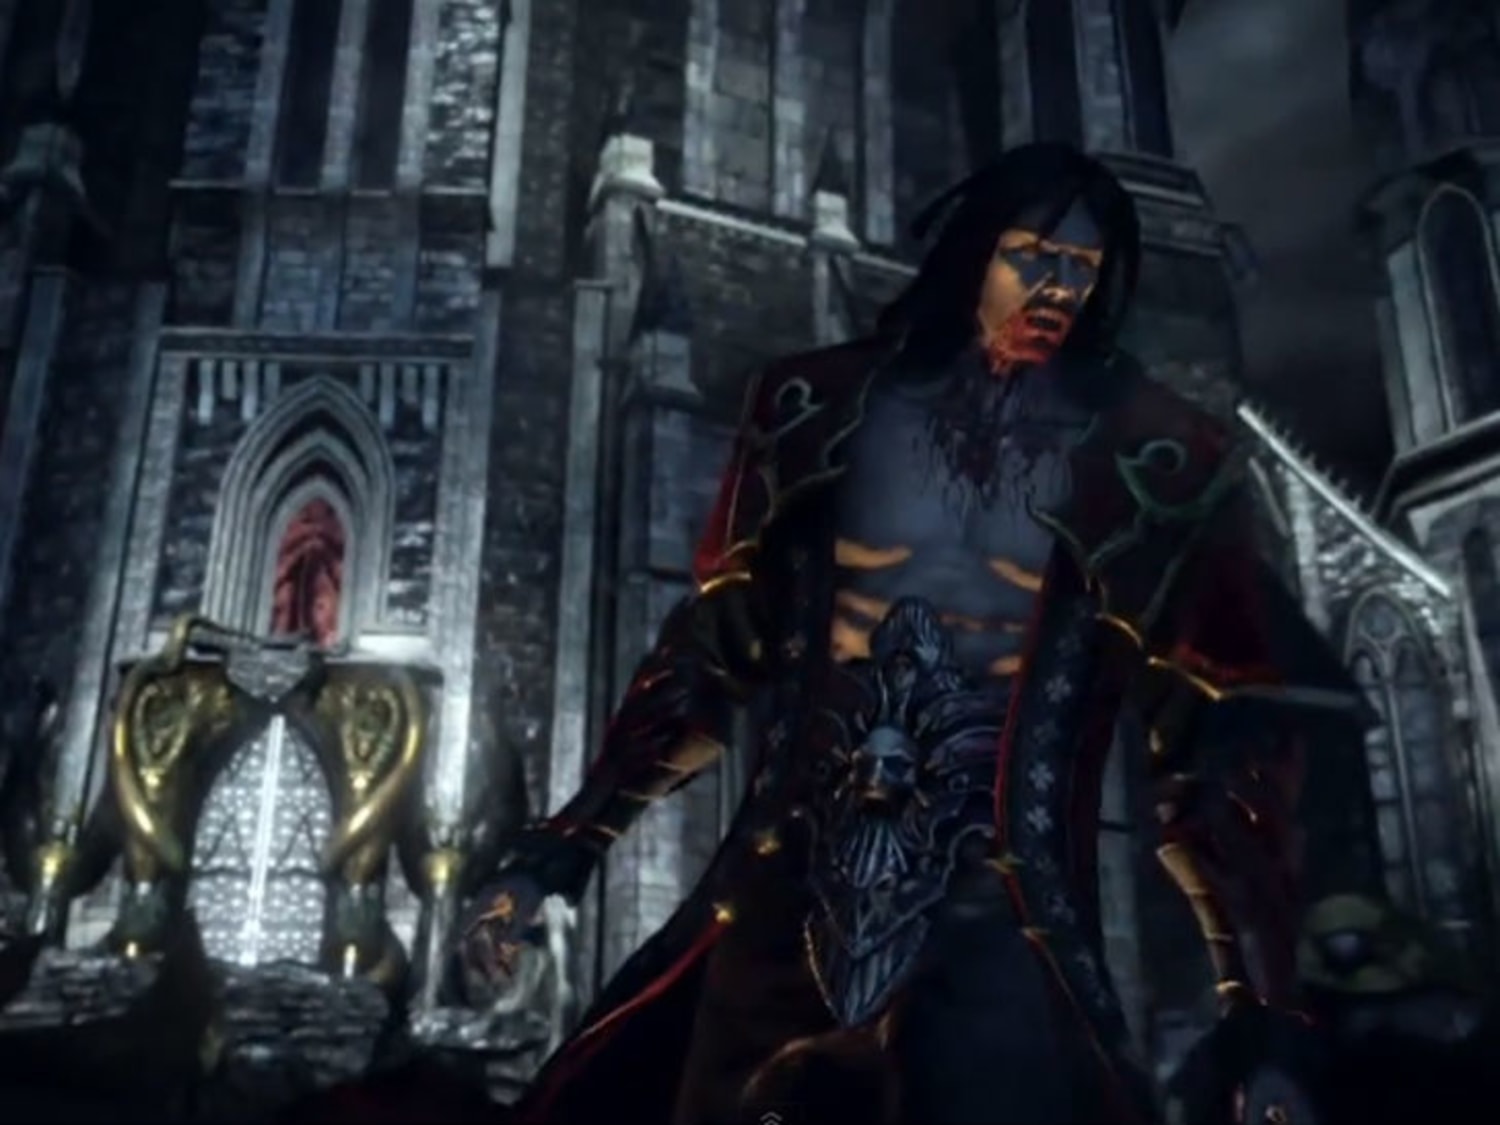 Castlevania: Lords of Shadow Collection